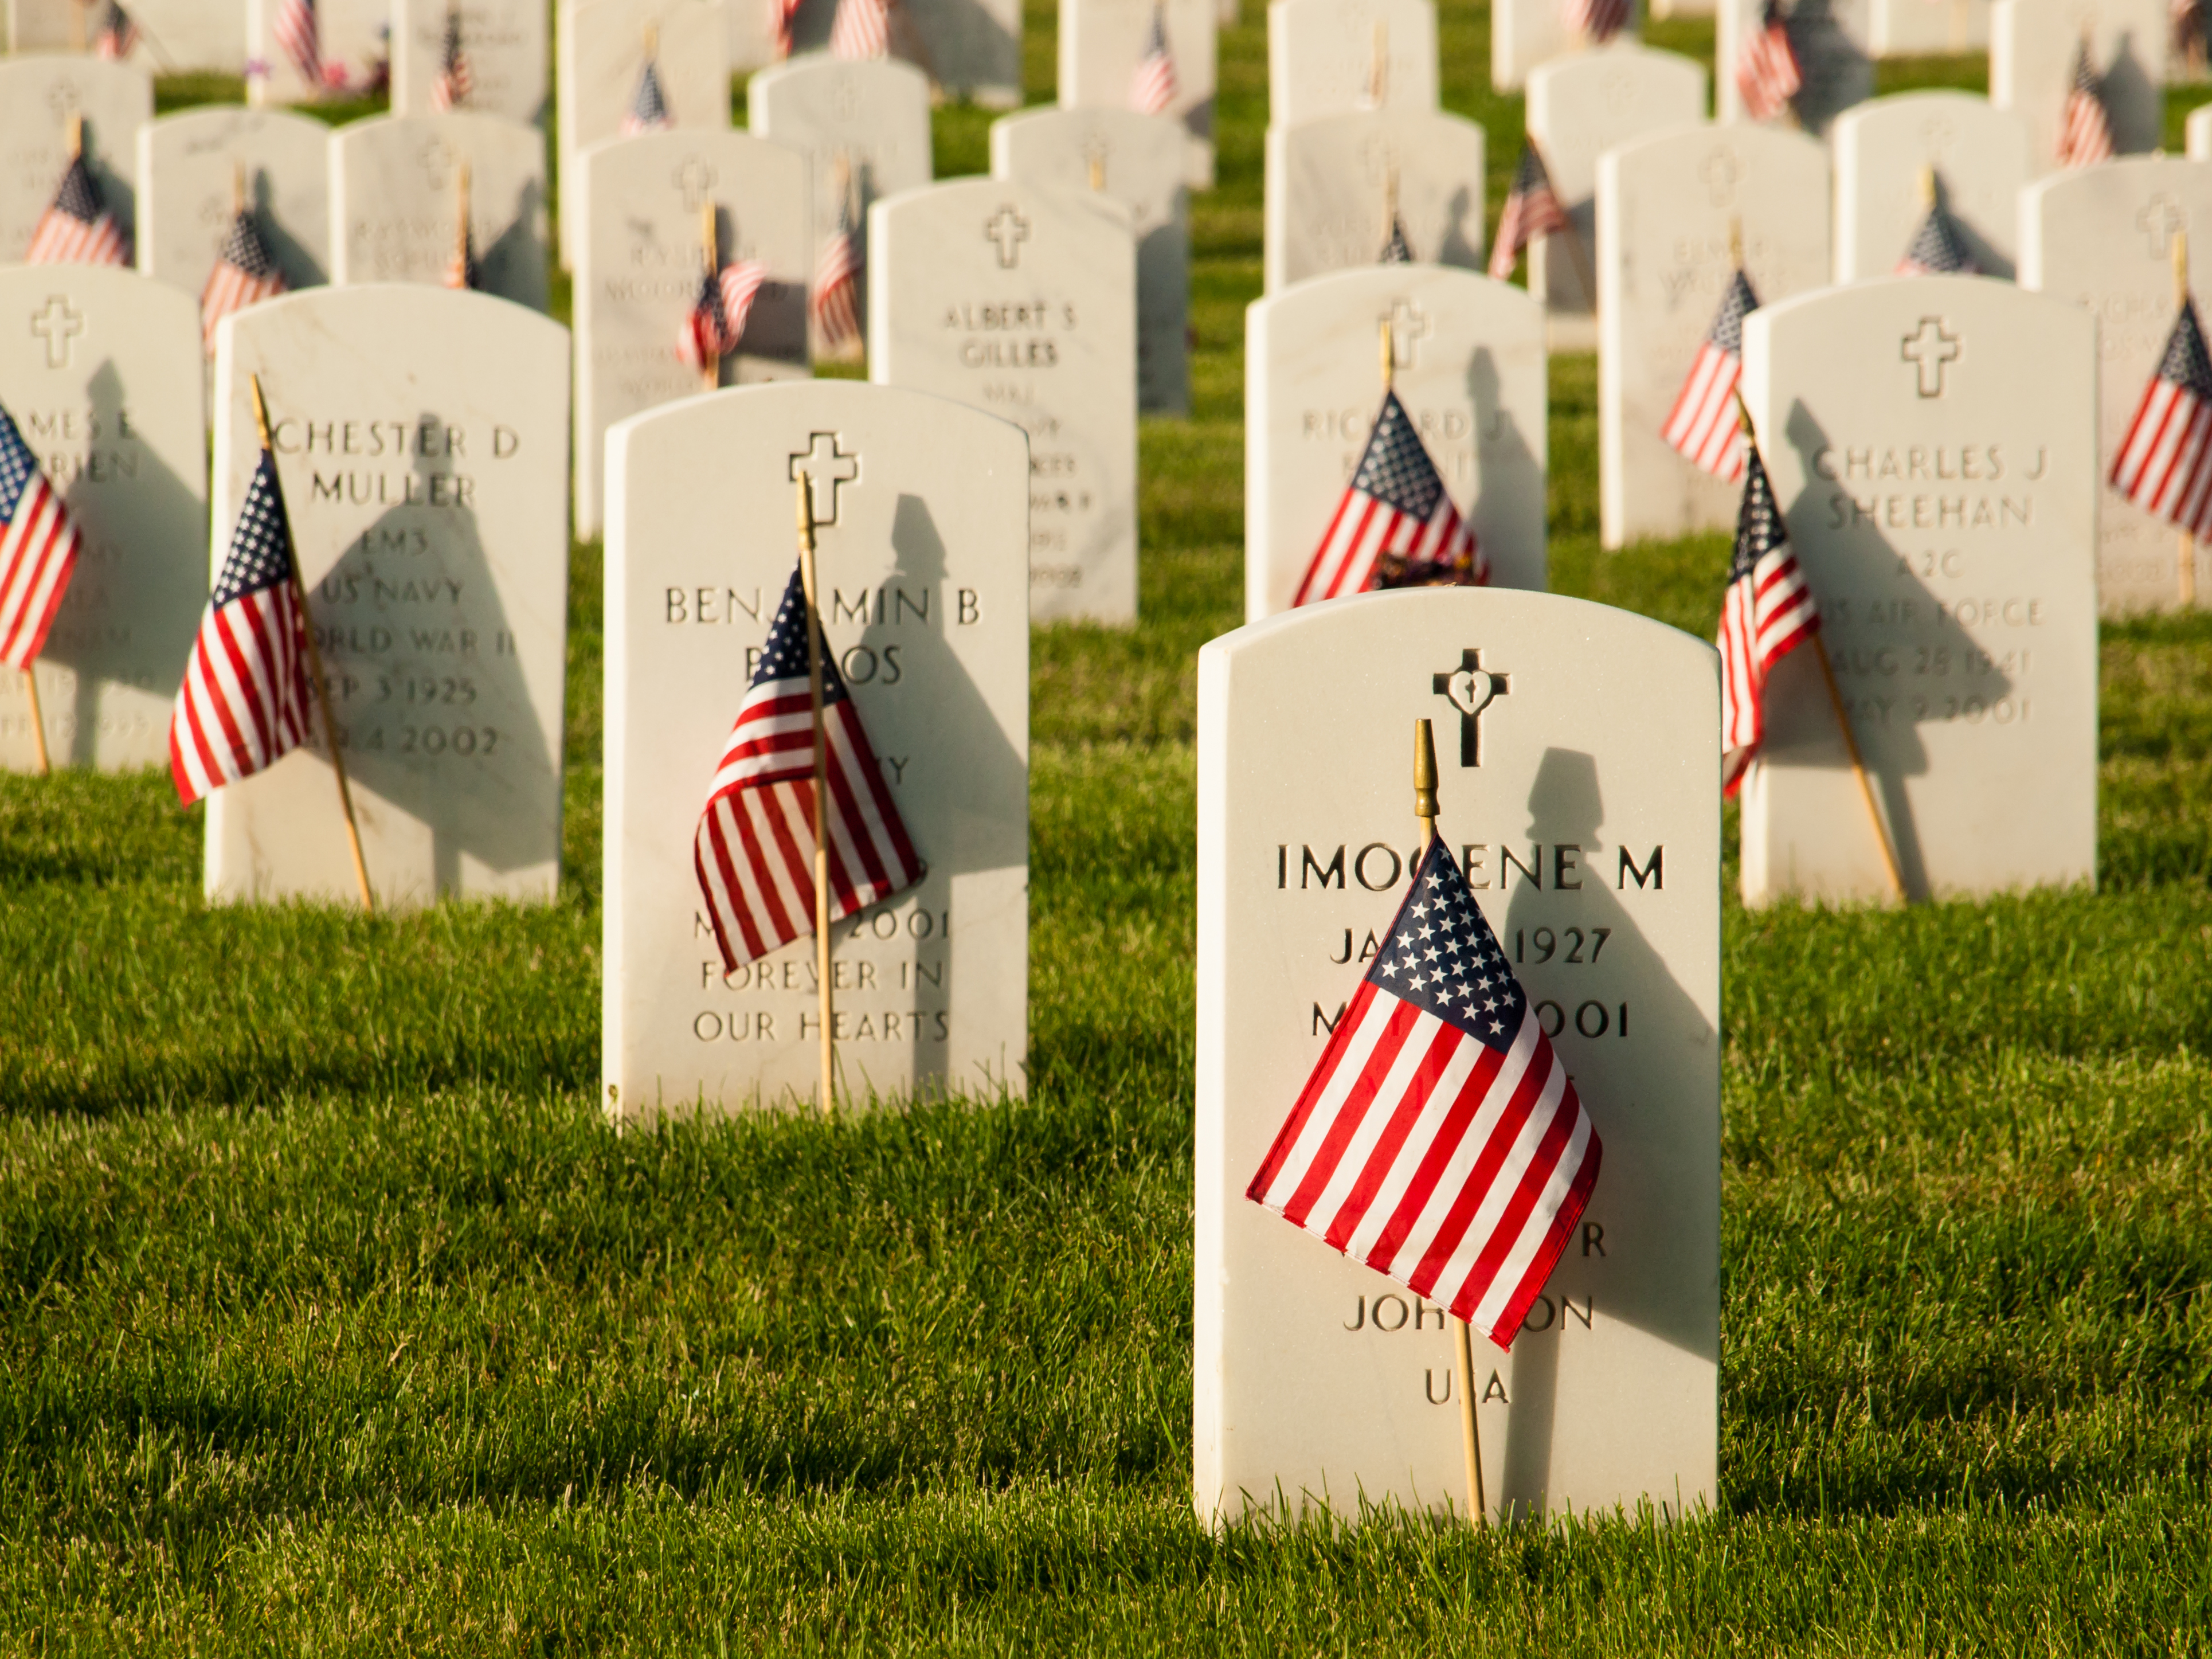 Graves of fallen soldiers marked with flags in cemetery